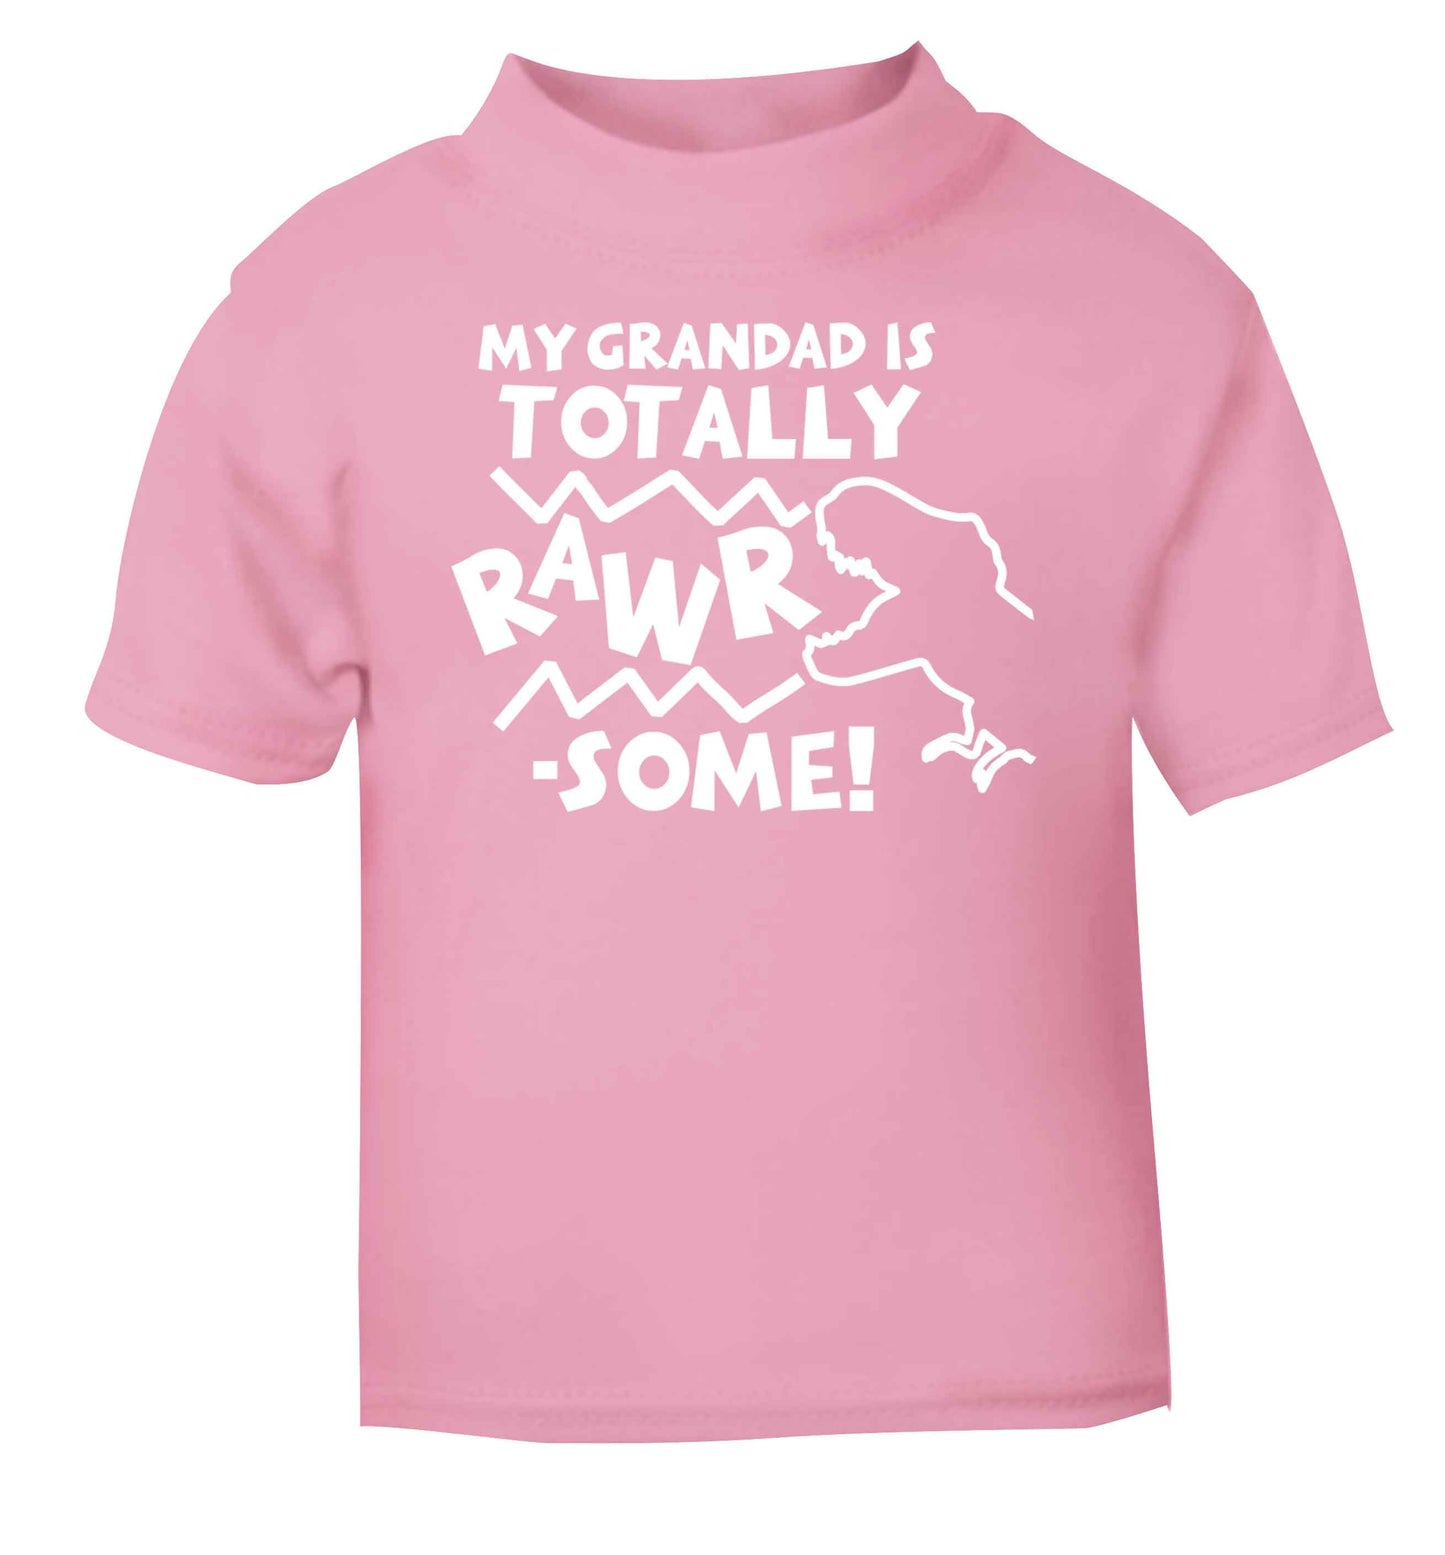 My grandad is totally rawrsome light pink baby toddler Tshirt 2 Years